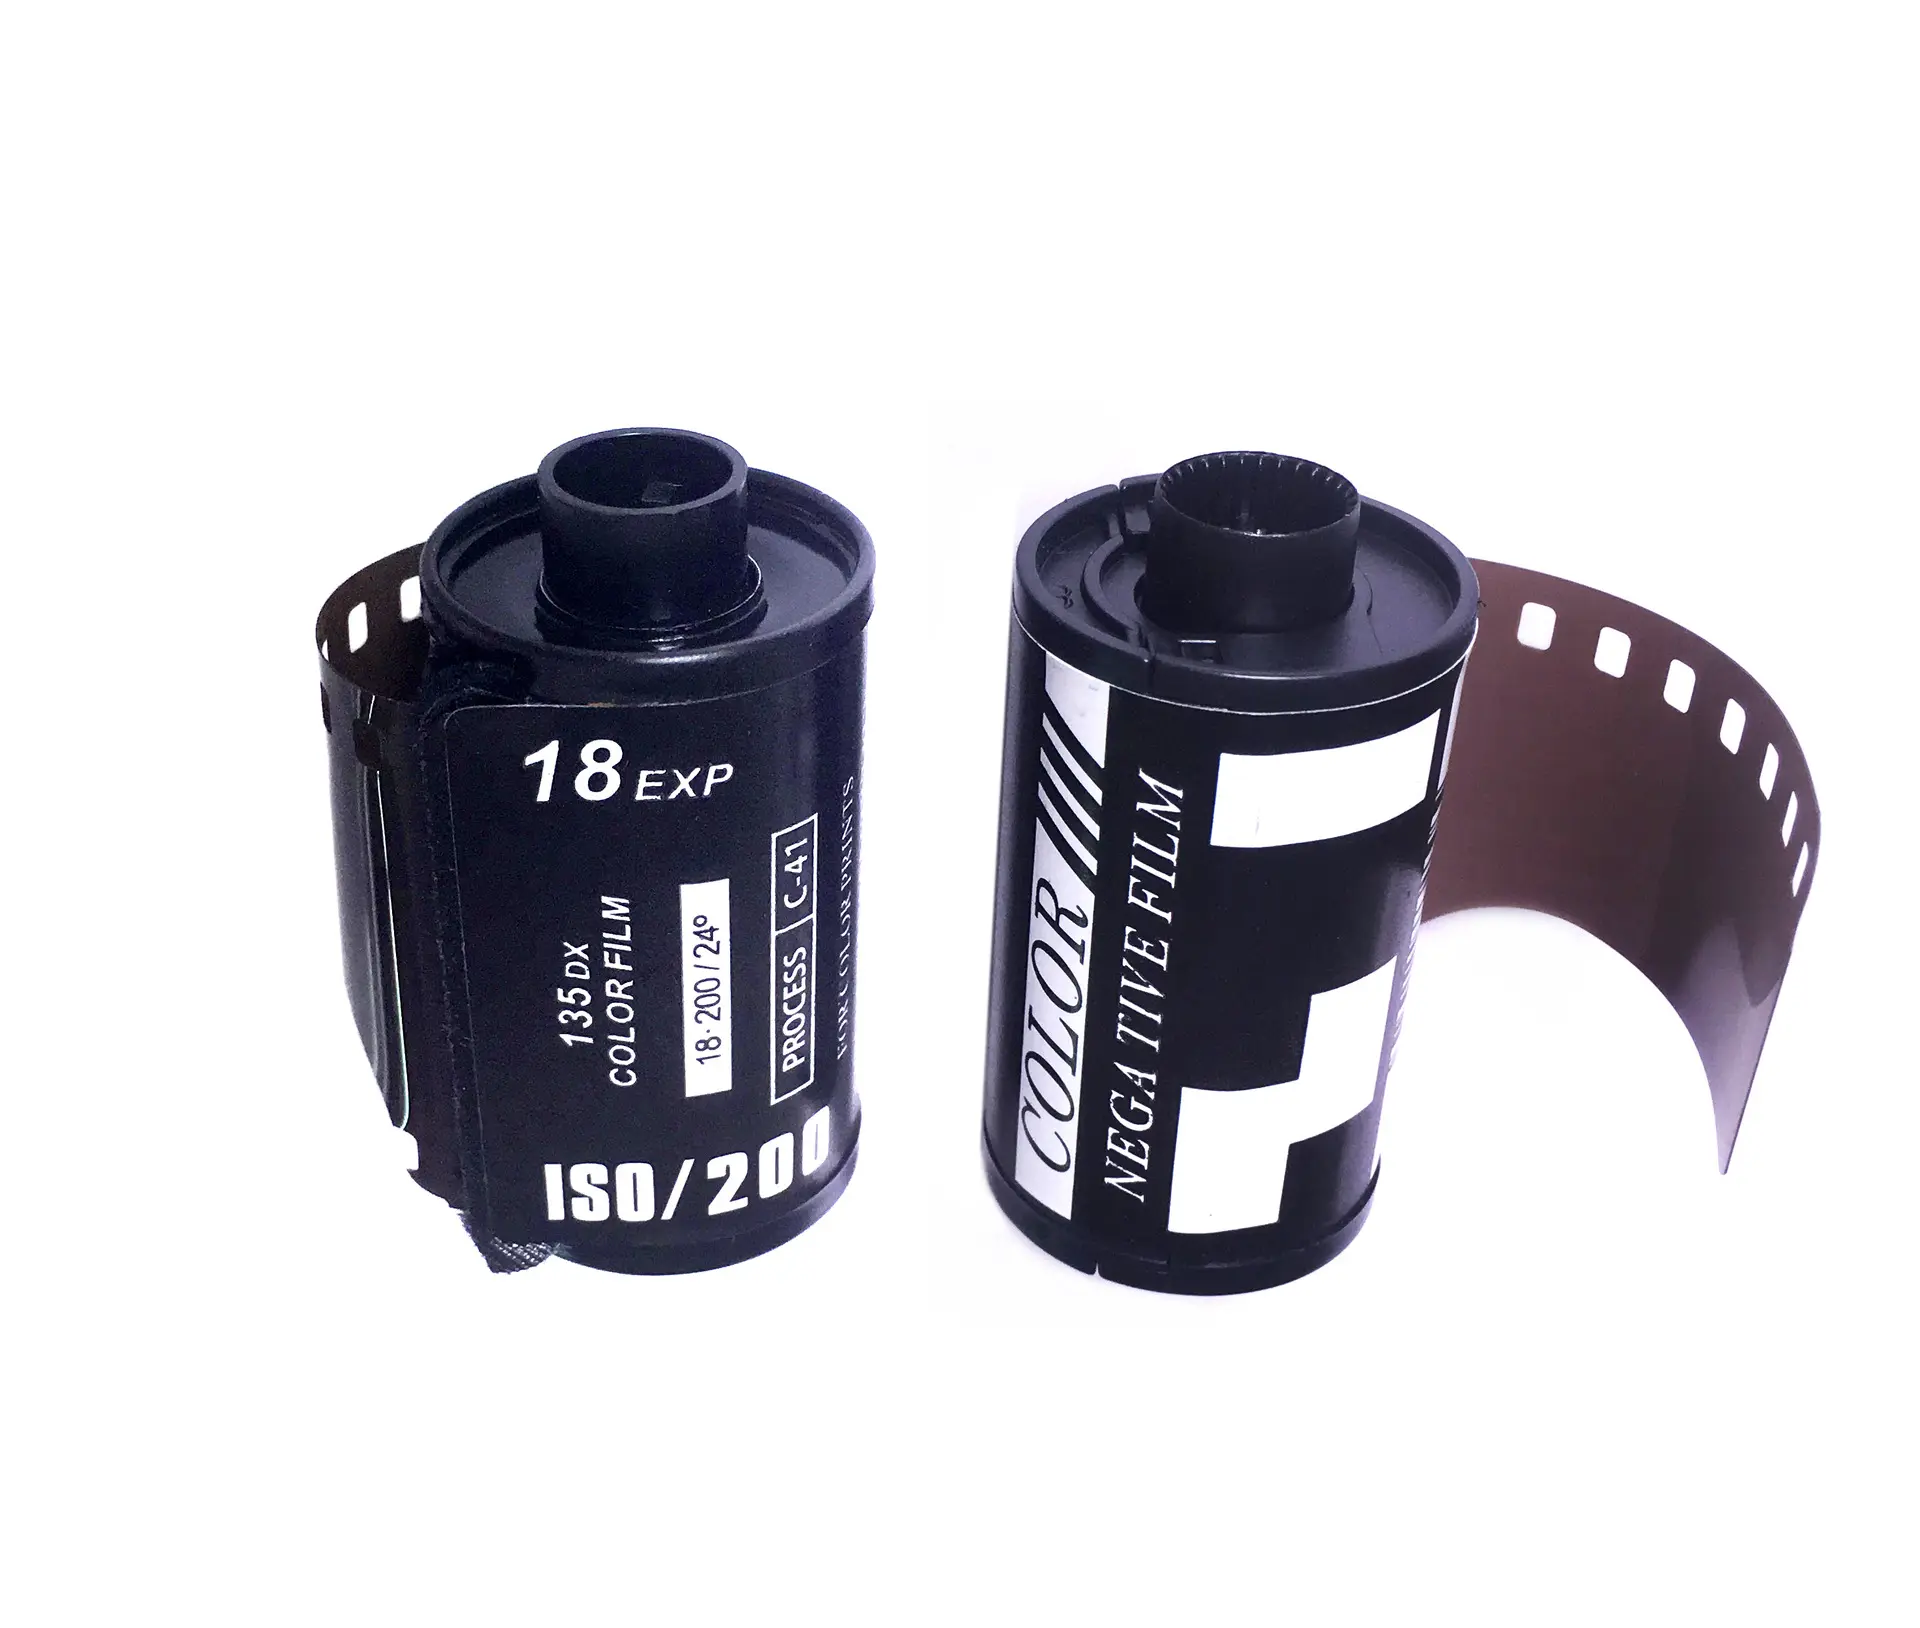 135 color film ISO200 negative film 18EXP point and shoot universal film 135 camera date fresh